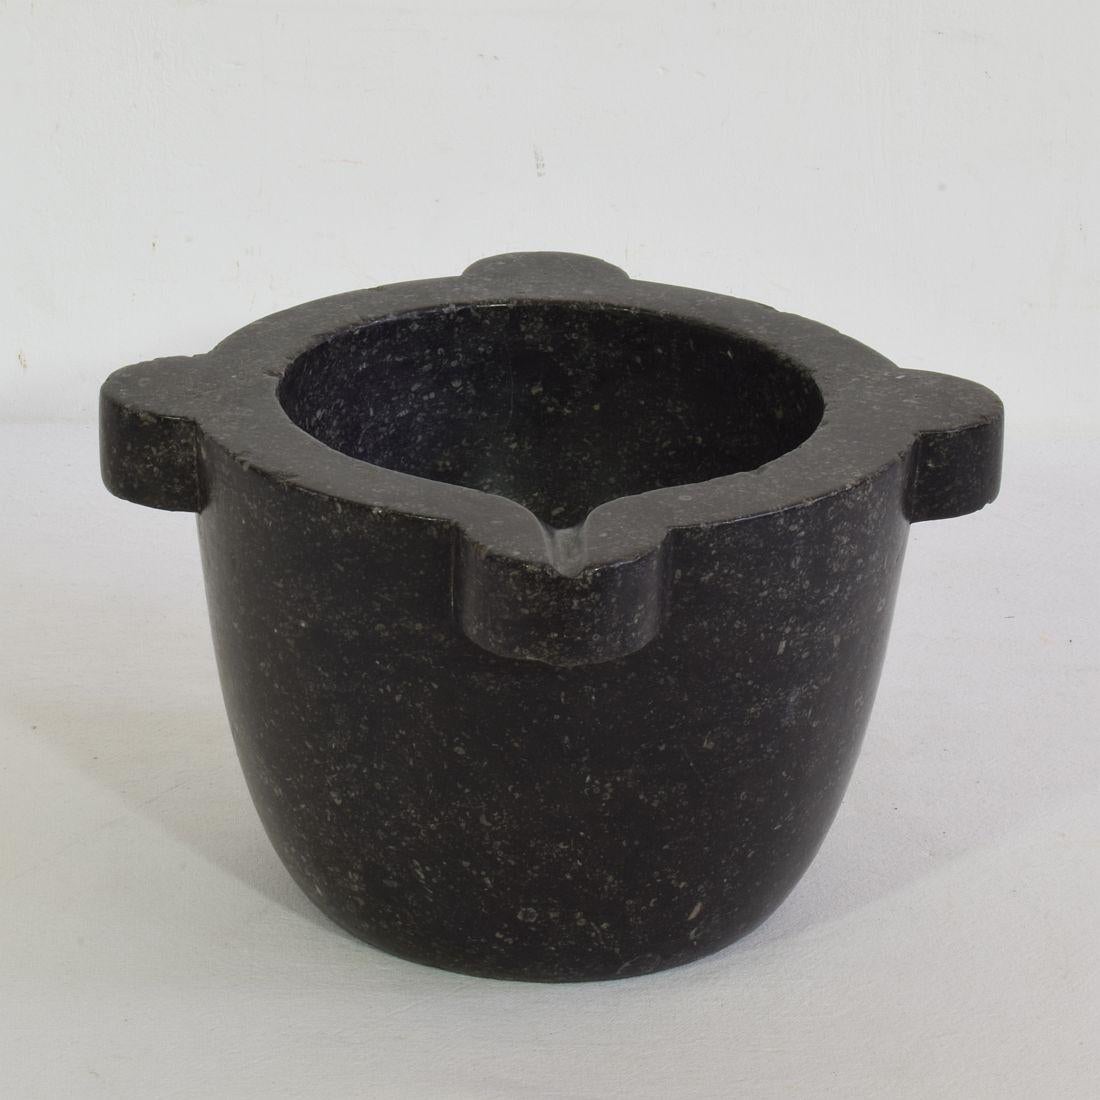 Beautiful and rare black marble (Belgium blue stone) mortar, France, circa 1750-1850. Great eyecatcher.
Weathered but good condition.